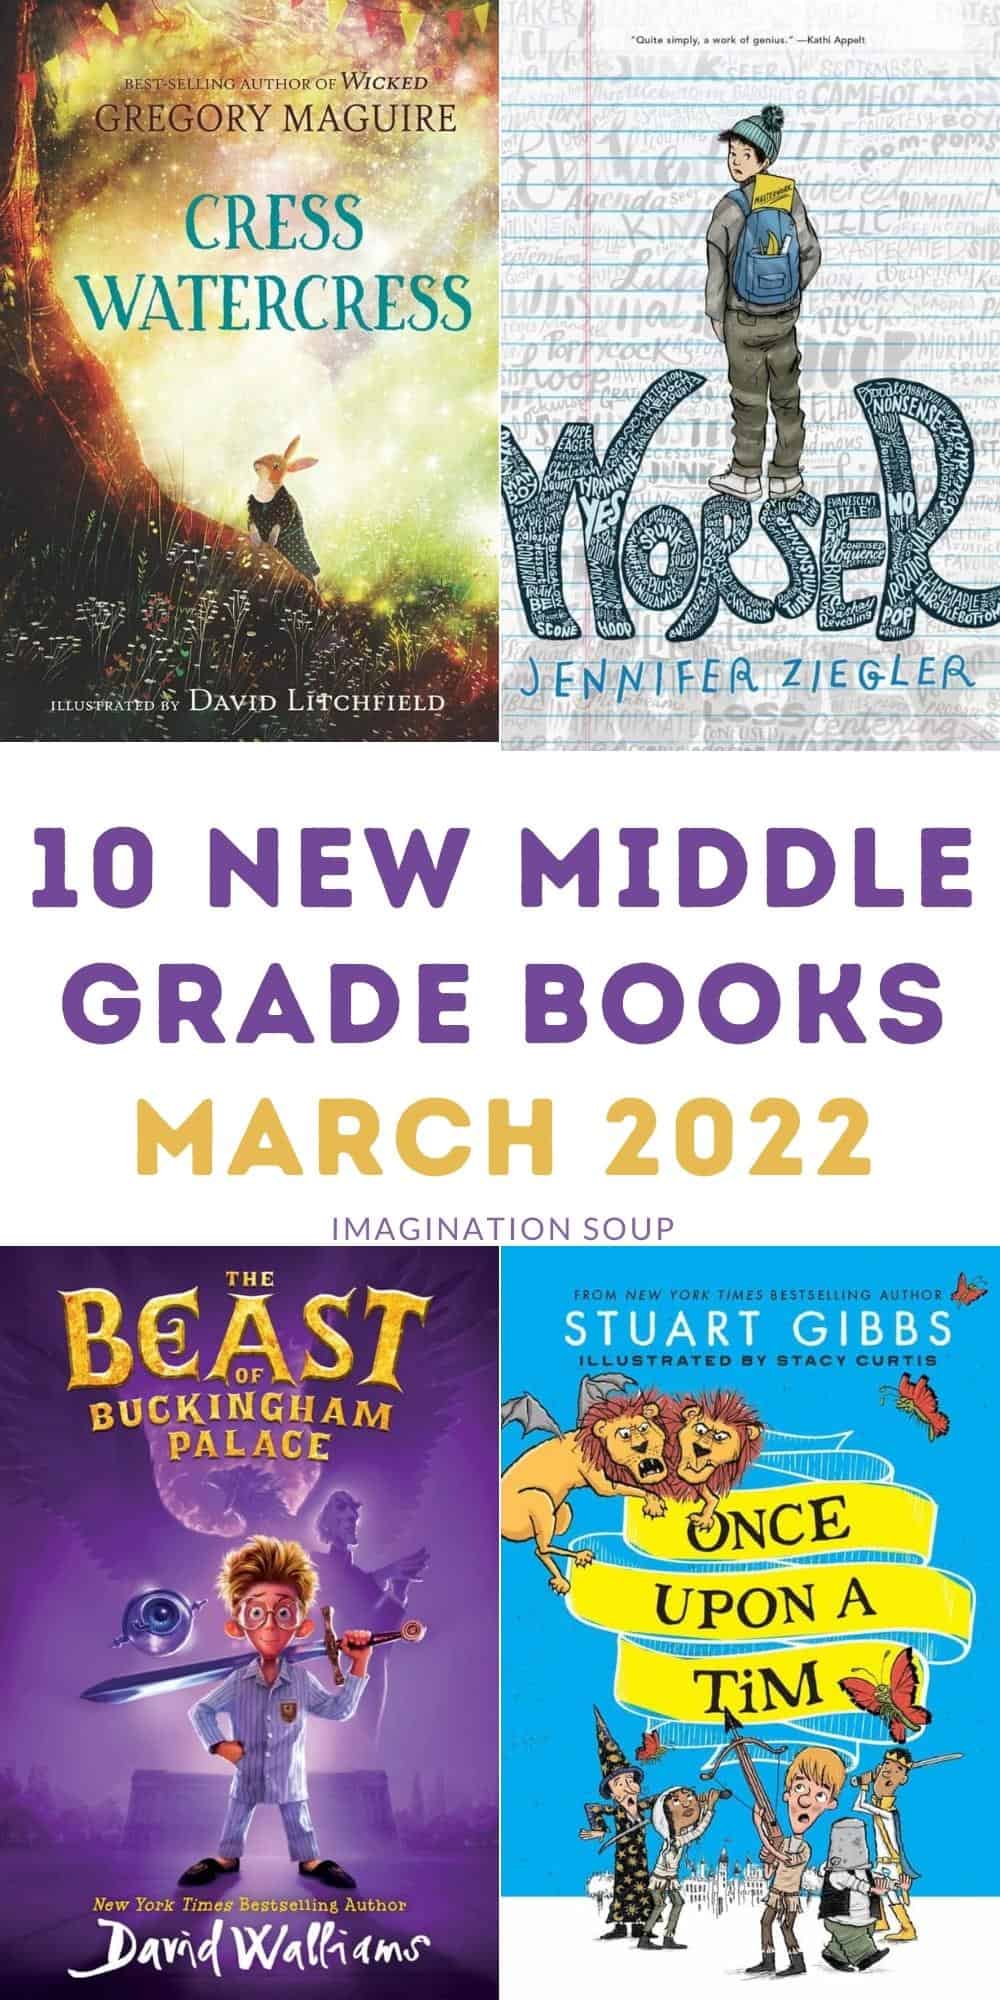 New Middle Grade Books, March 2022